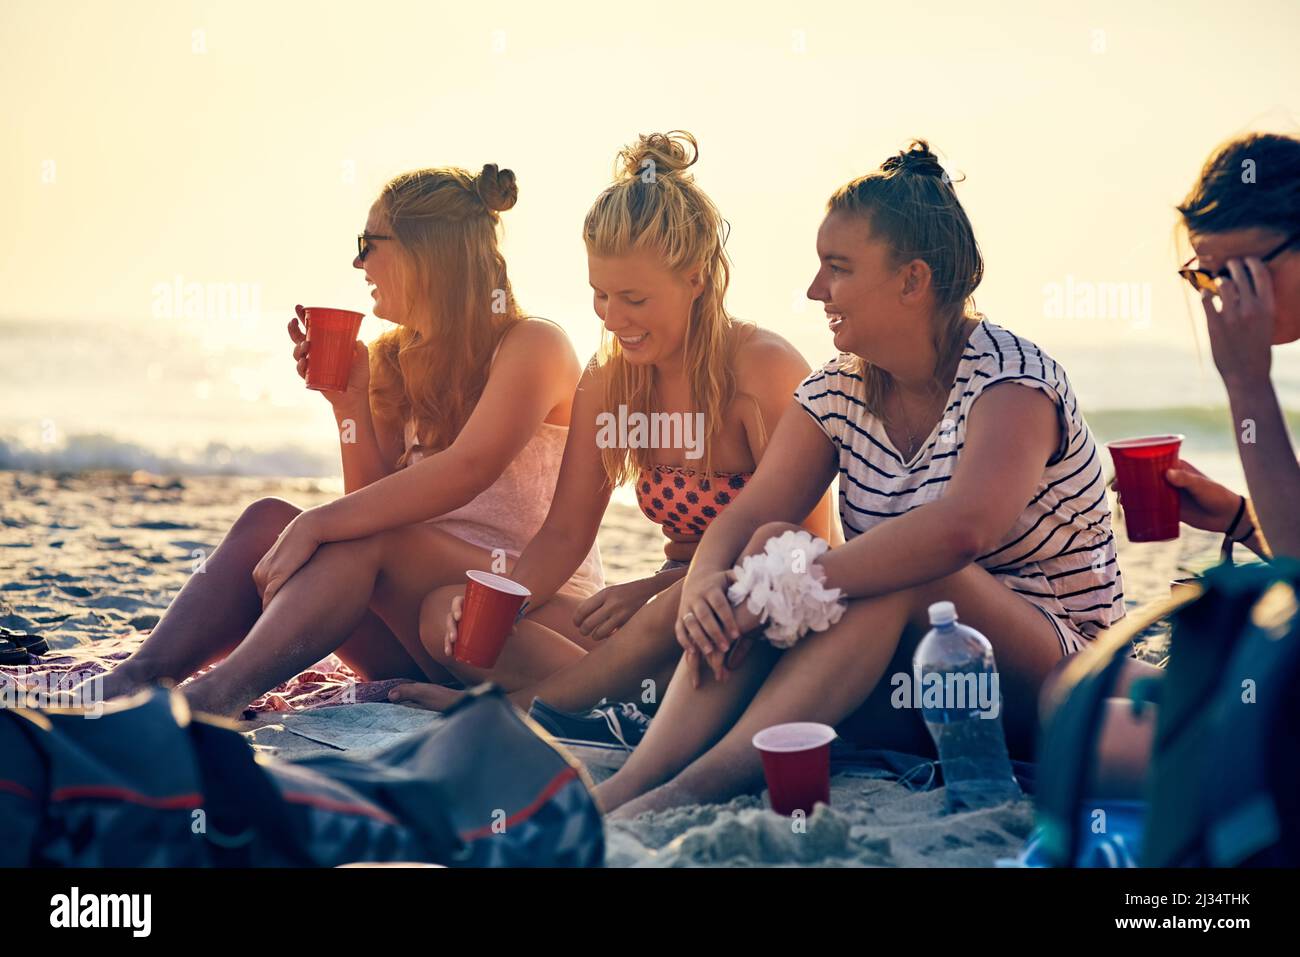 Good times and tan lines. Shot of young female best friends hanging out at the beach. Stock Photo